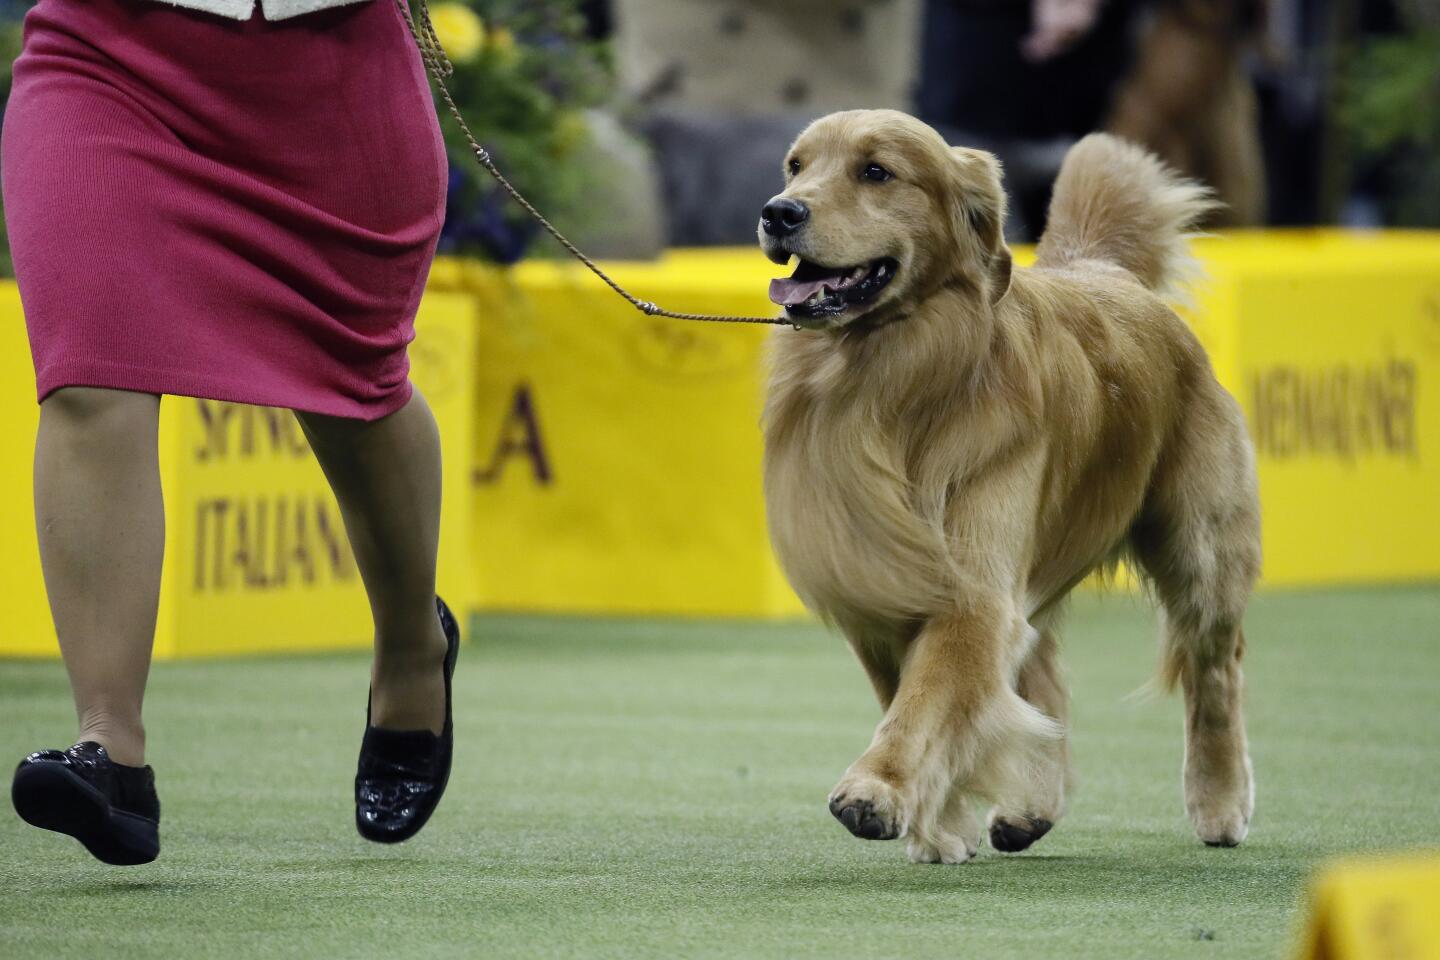 Daniel the golden retriever was clearly the crowd favorite — a golden has never won at Westminster — and fans chanted his name.